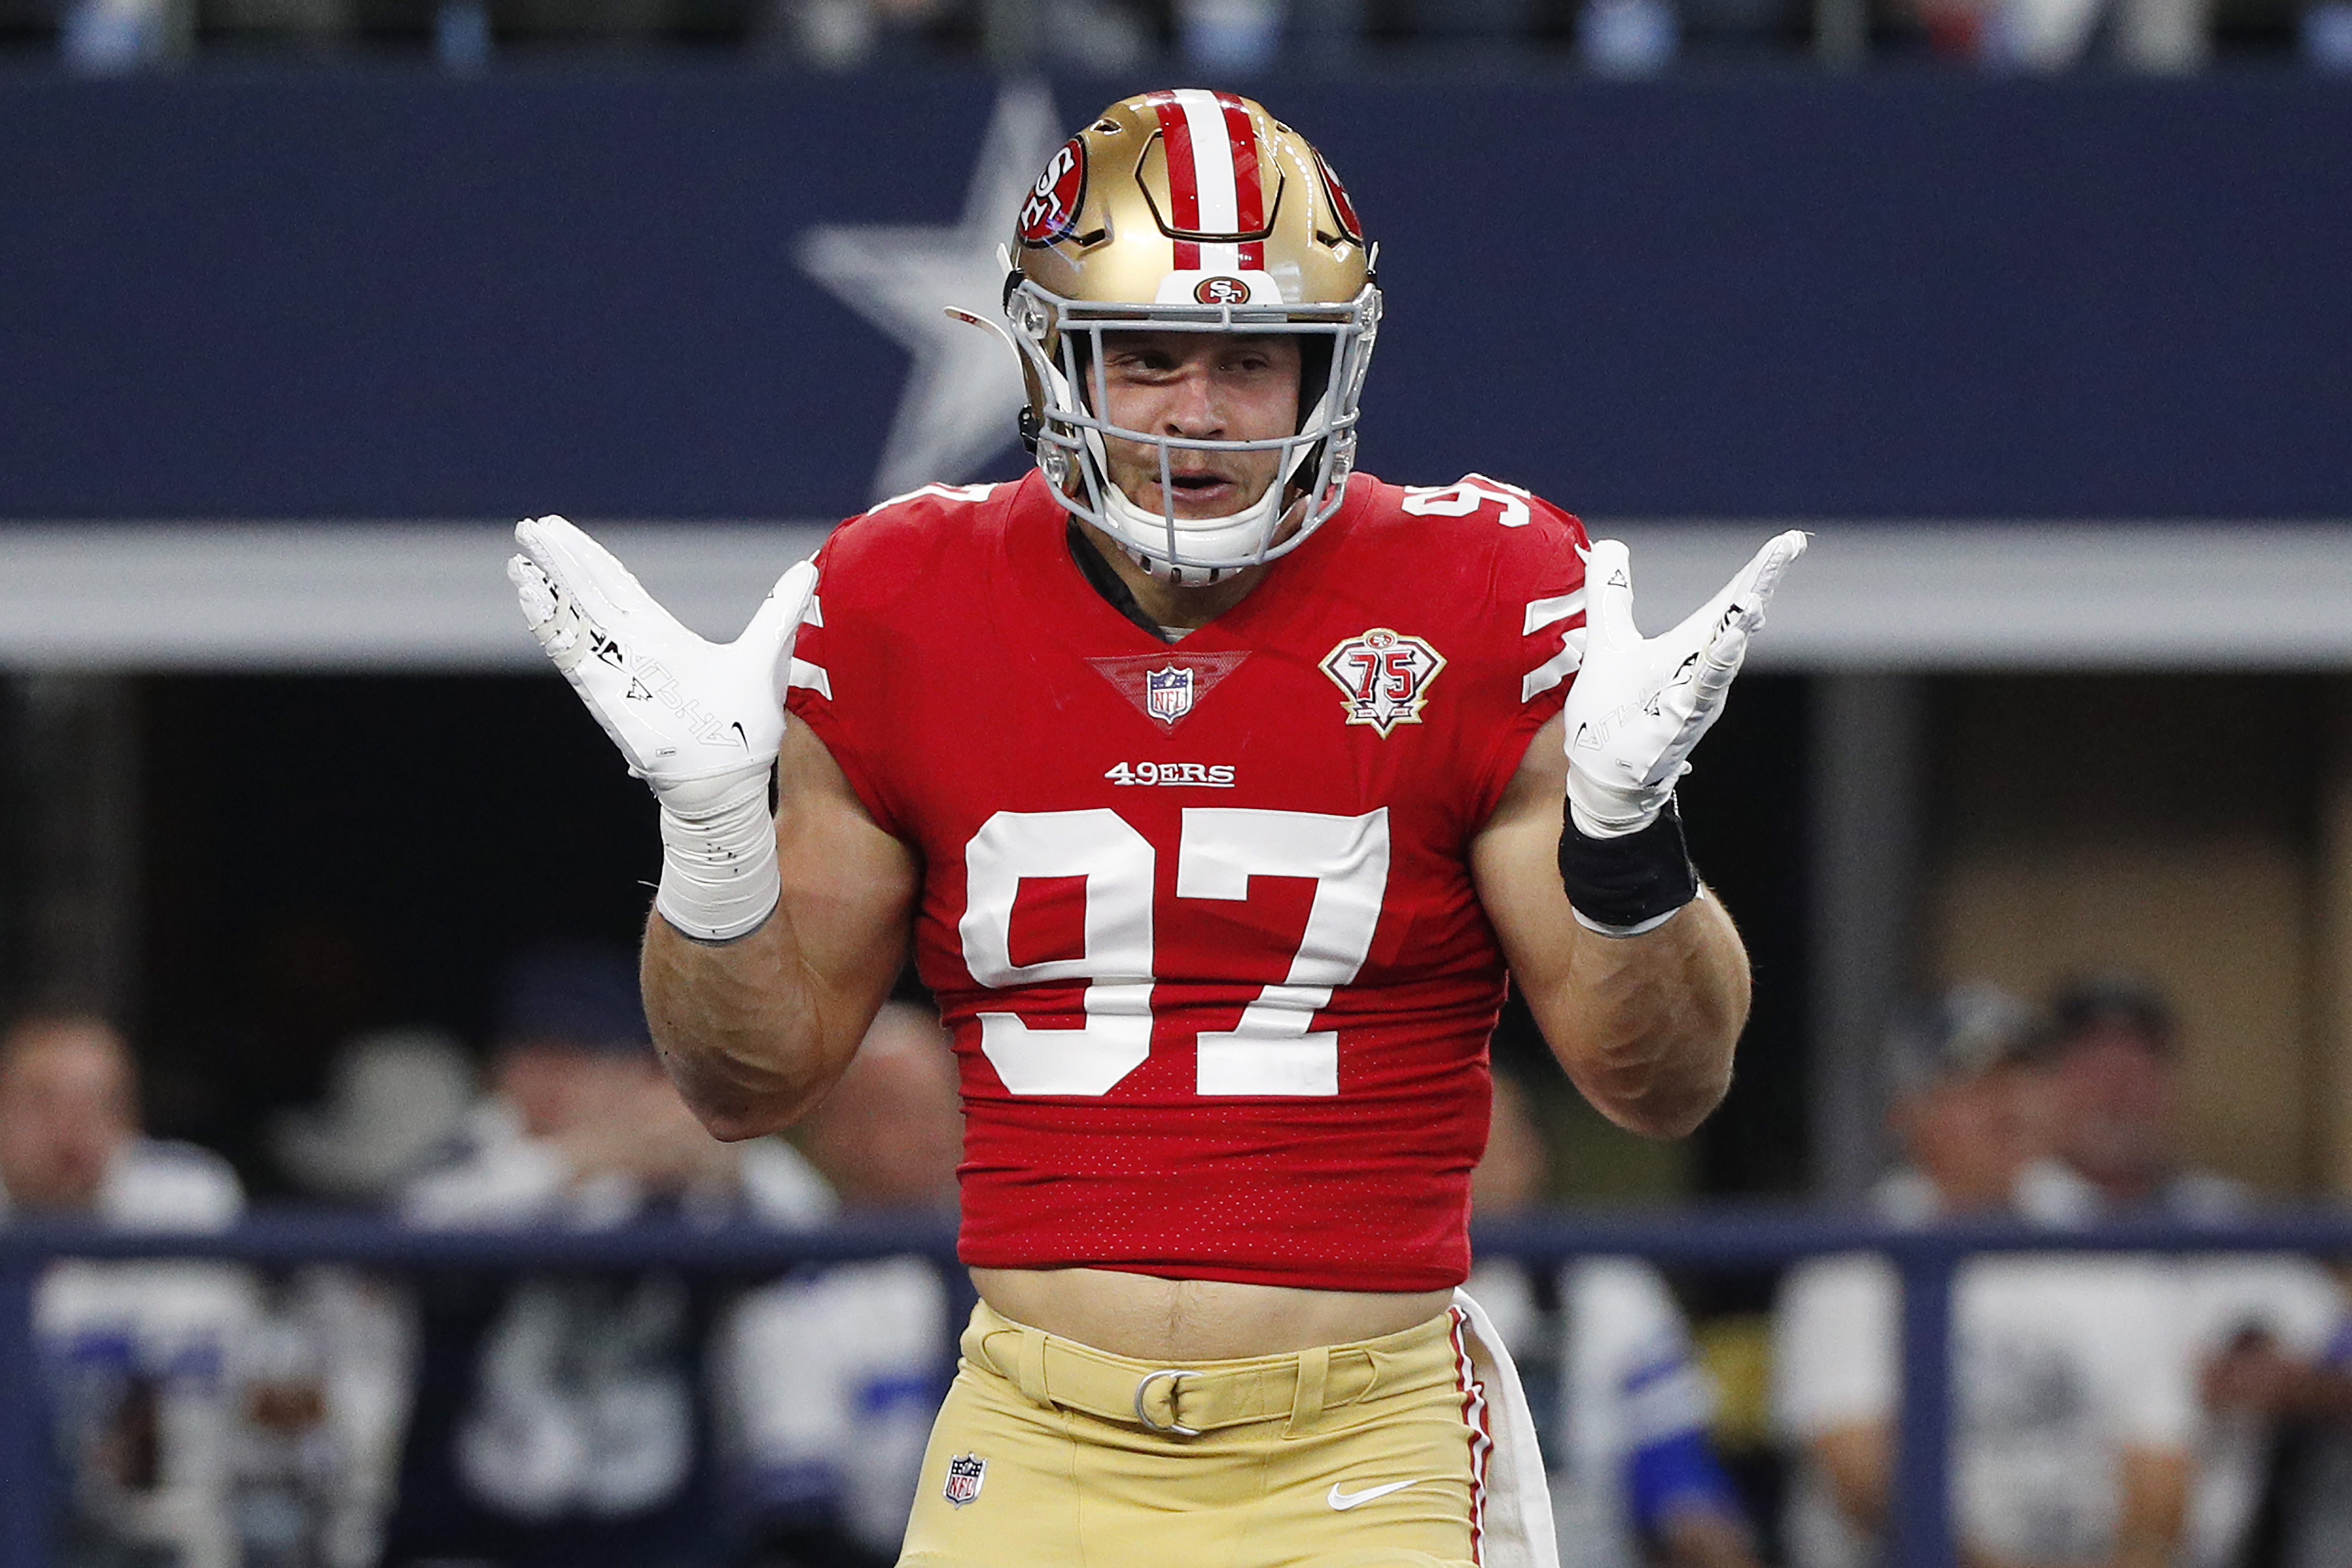 Nick Bosa #97 of the San Francisco 49ers reacts after a sack against the Dallas Cowboys during the first quarter in the NFC Wild Card Playoff game at AT&amp;T Stadium on January 16, 2022 in Arlington, Texas.